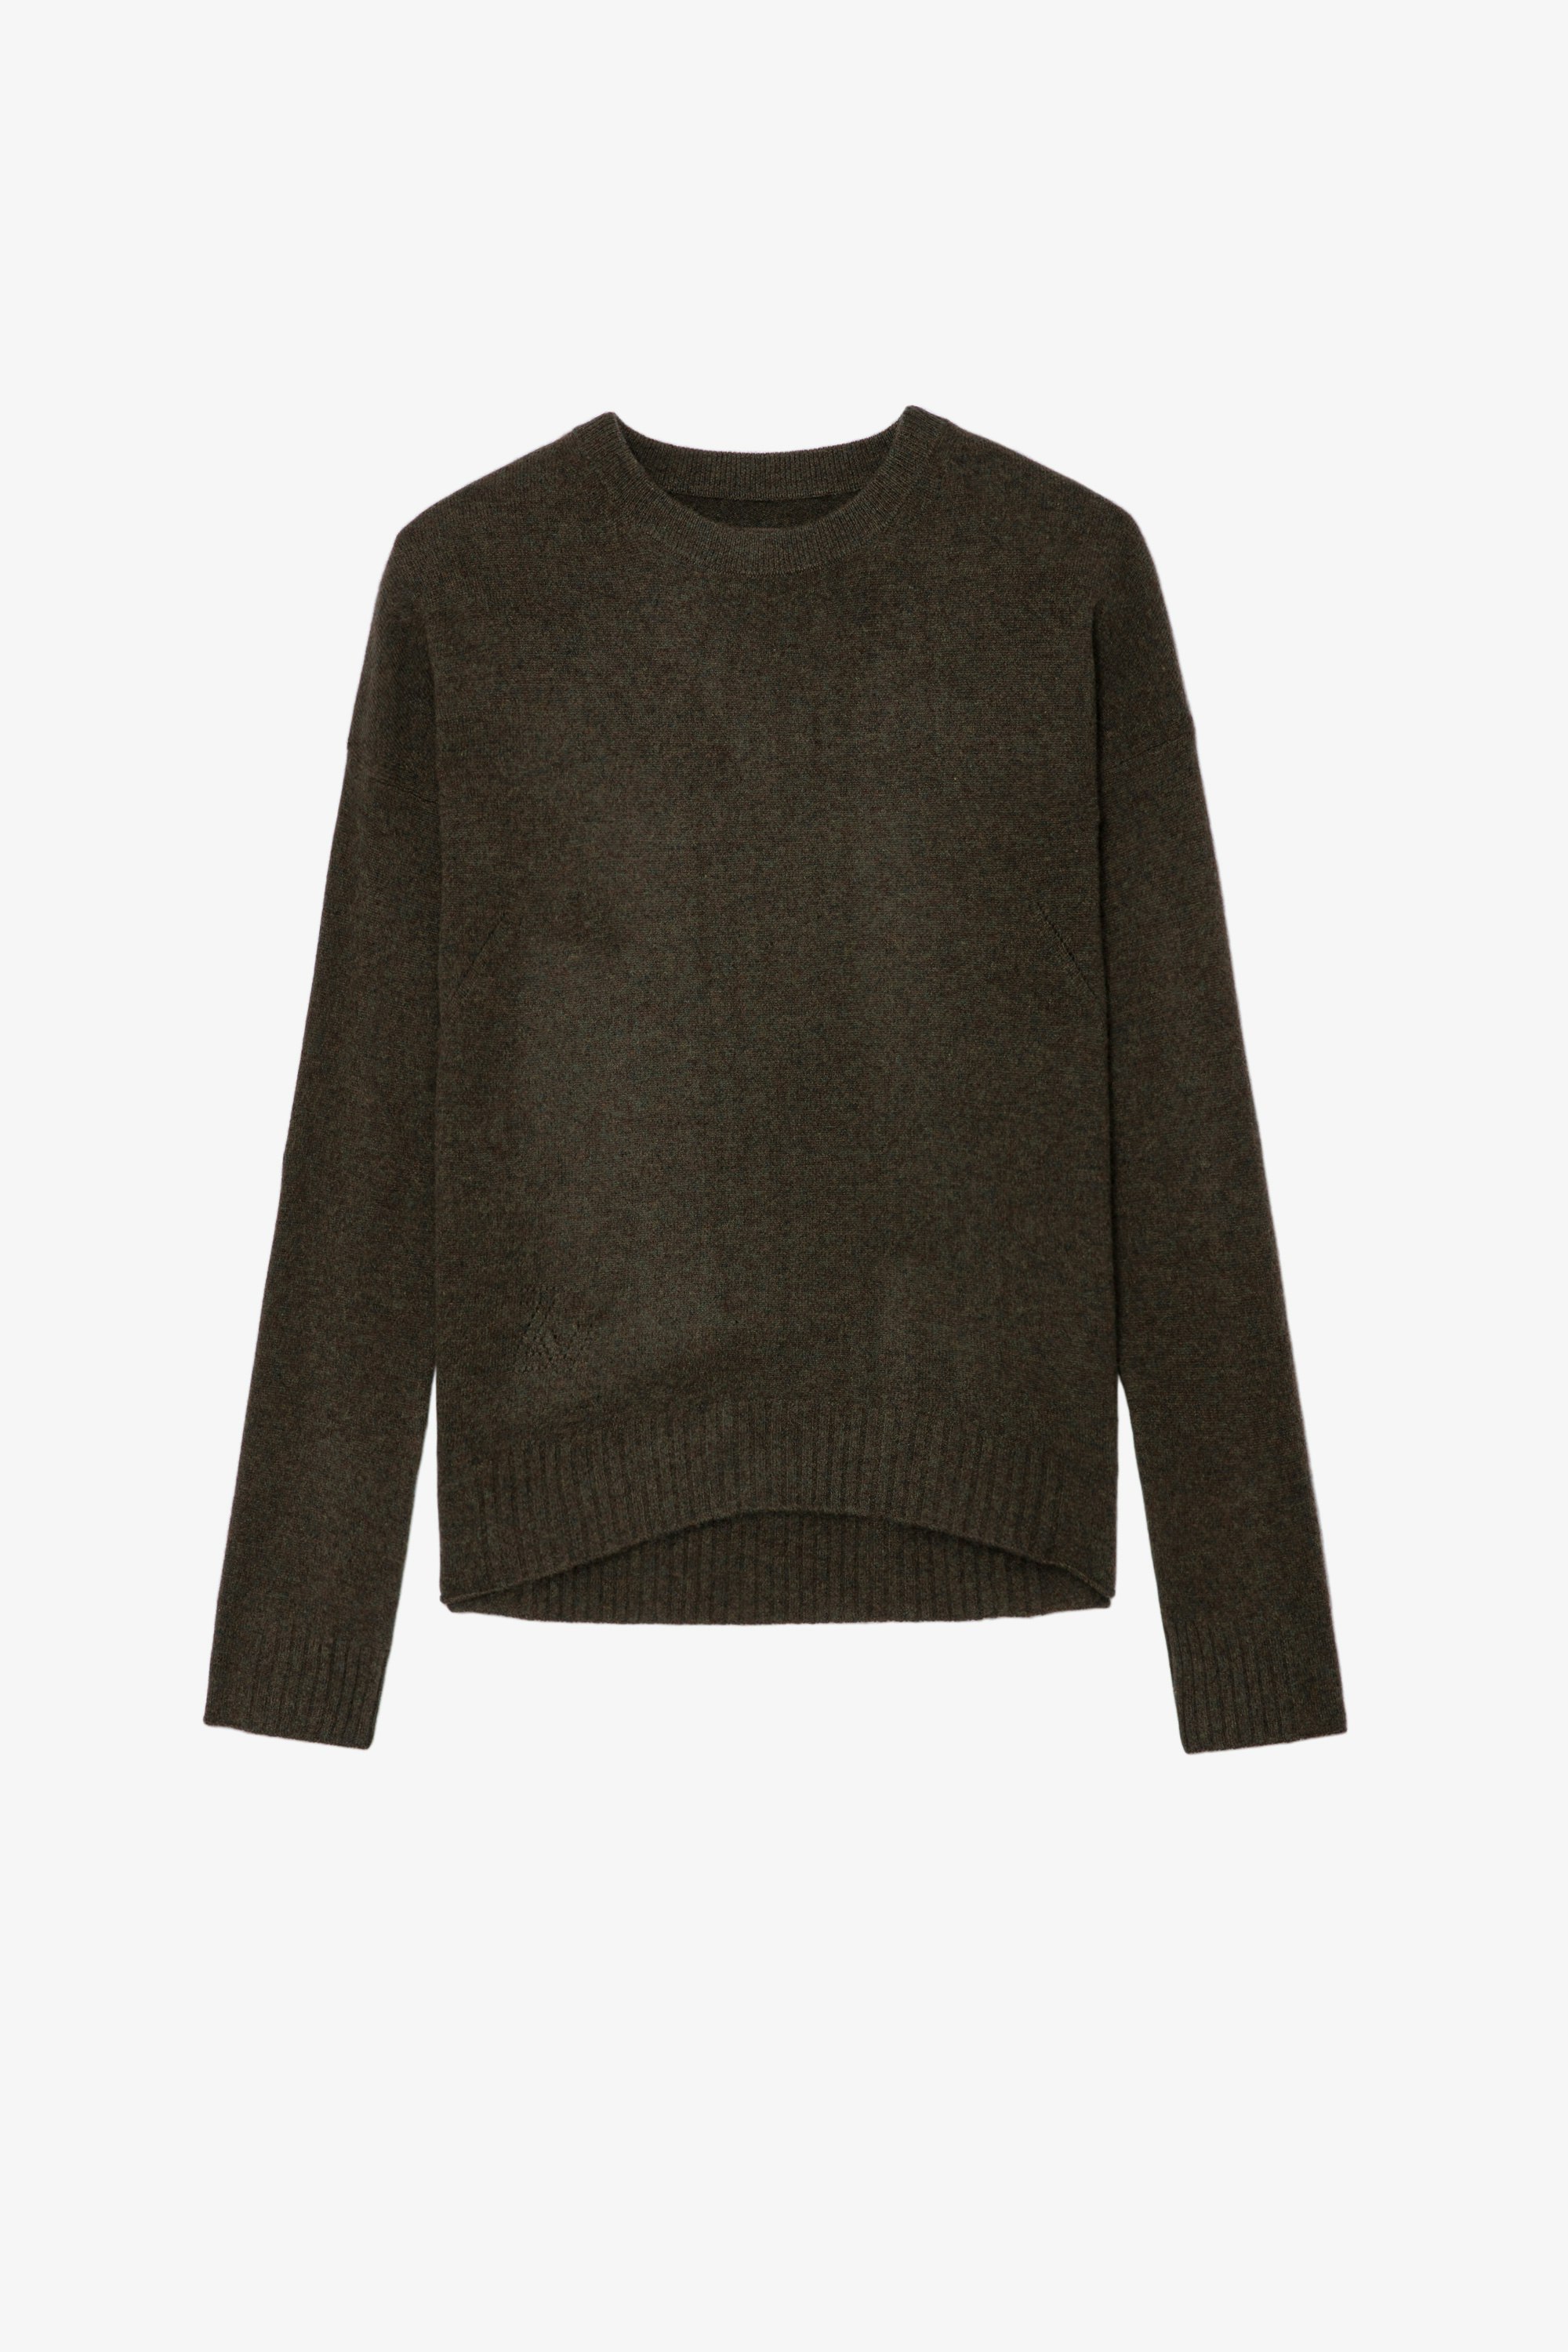 Cici Patch Cashmere Jumper Bronze feather cashmere round-neck jumper with star patches on the elbows